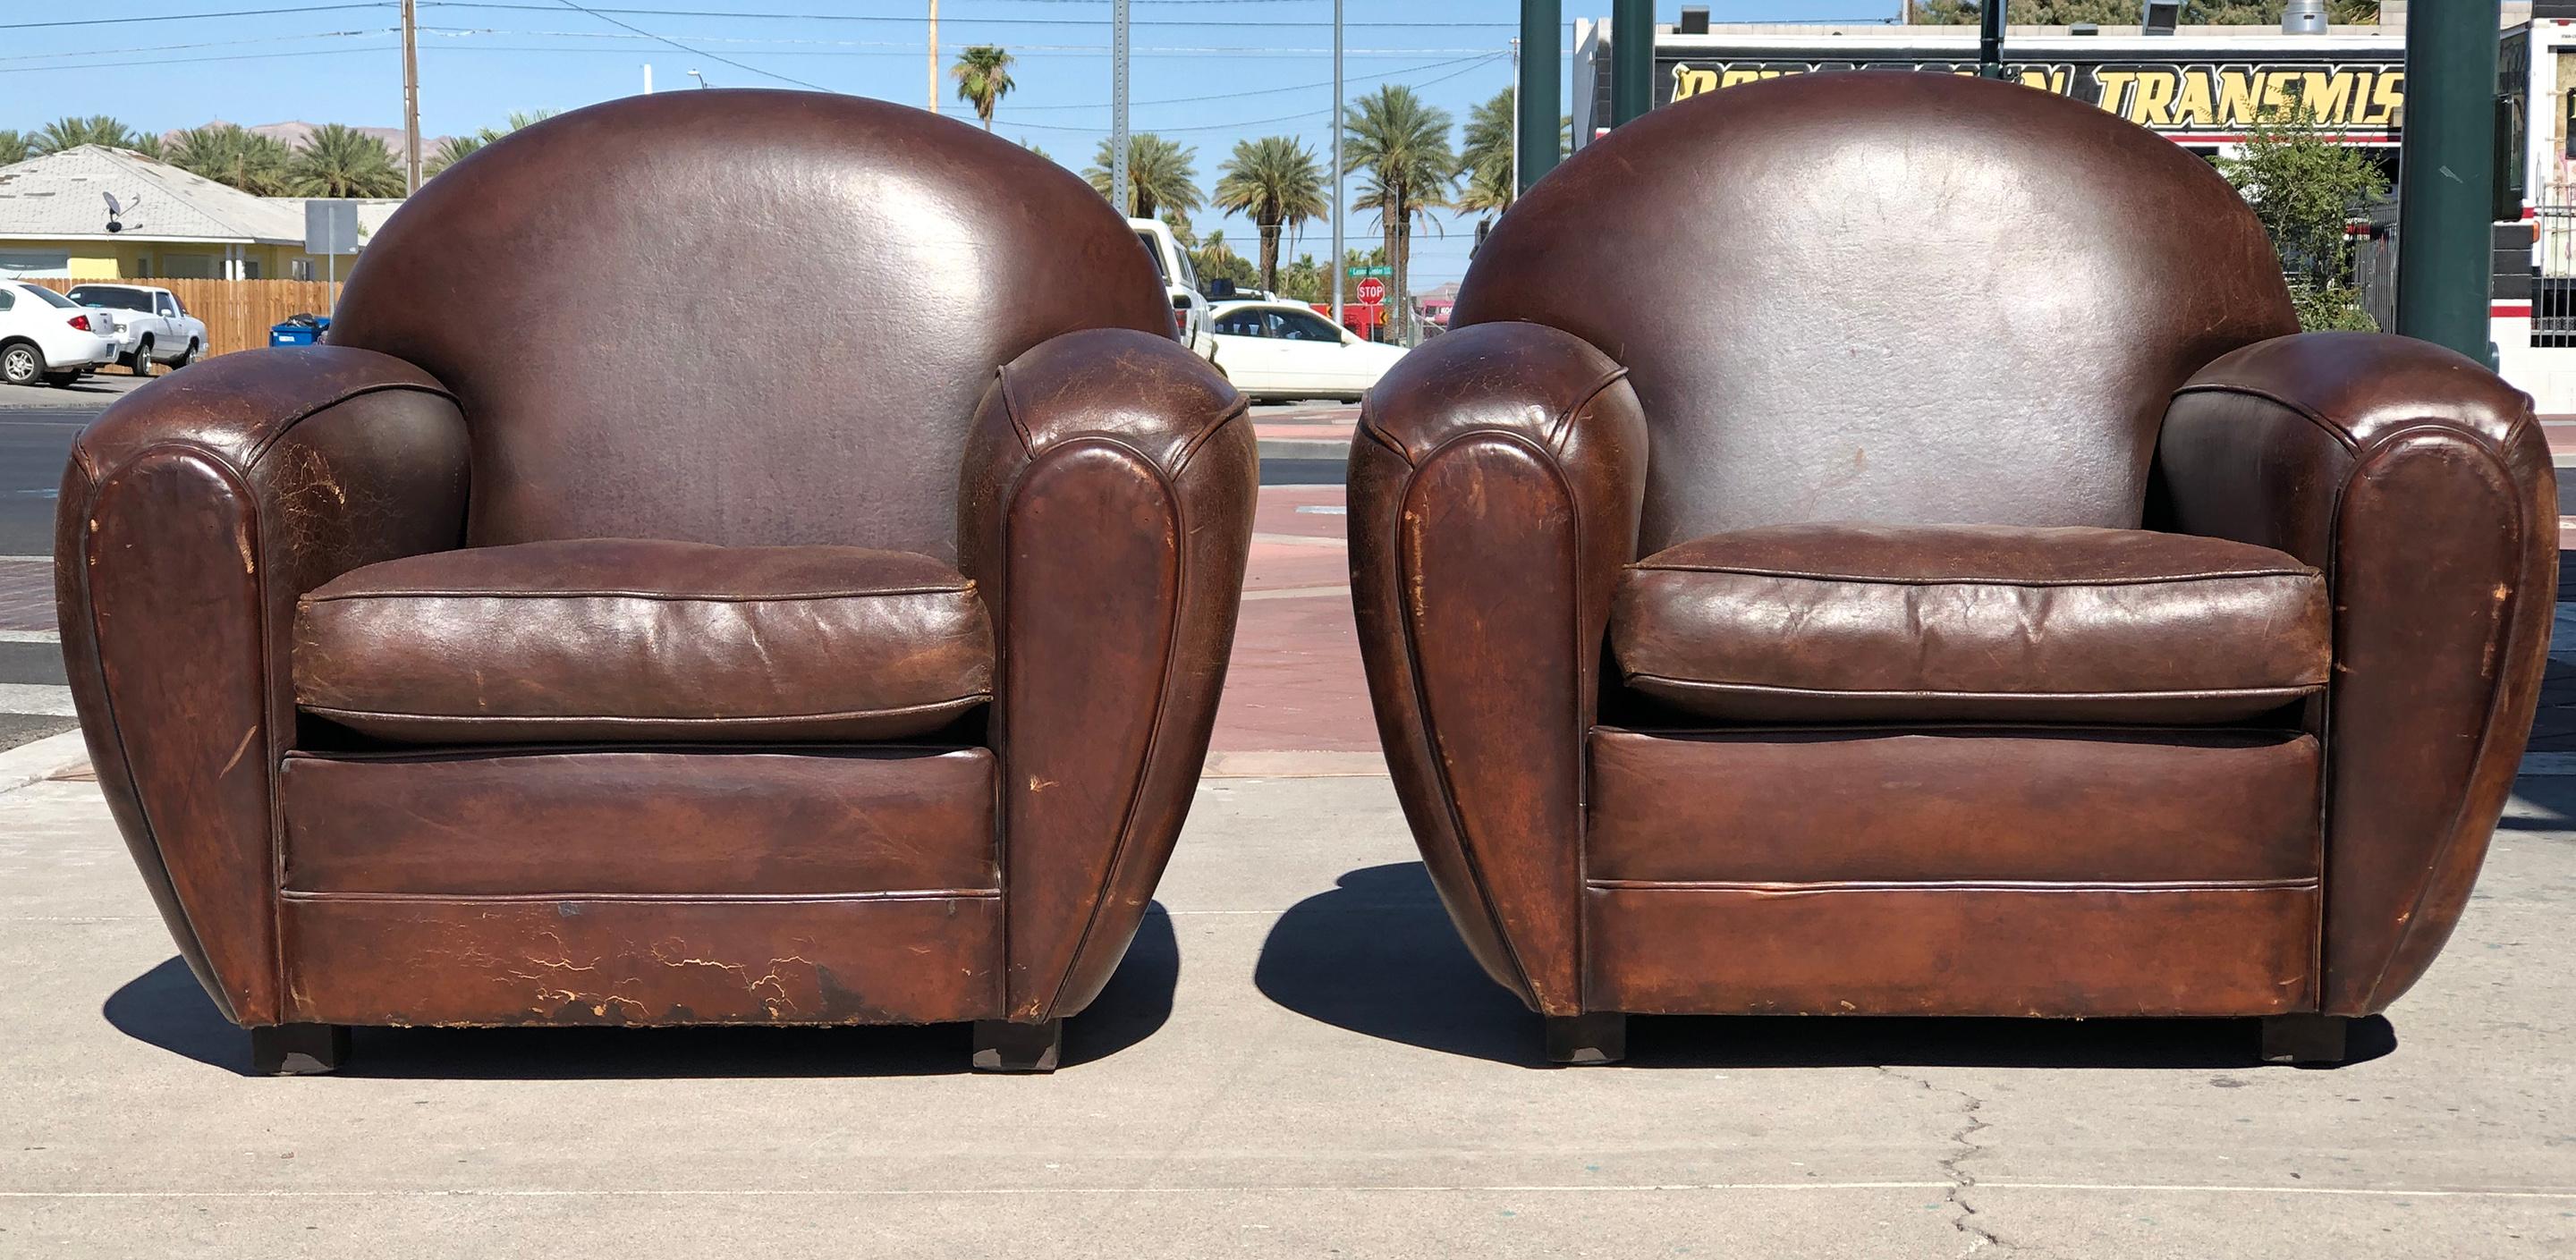 An absolutely fabulous pair of round Art Deco leather club chairs. These leather club chairs were purchased in the 1980's in Paris at the Les Puces de Saint-Ouen. The chairs were re-dyed about 4 years ago and are in stunningly distressed condition